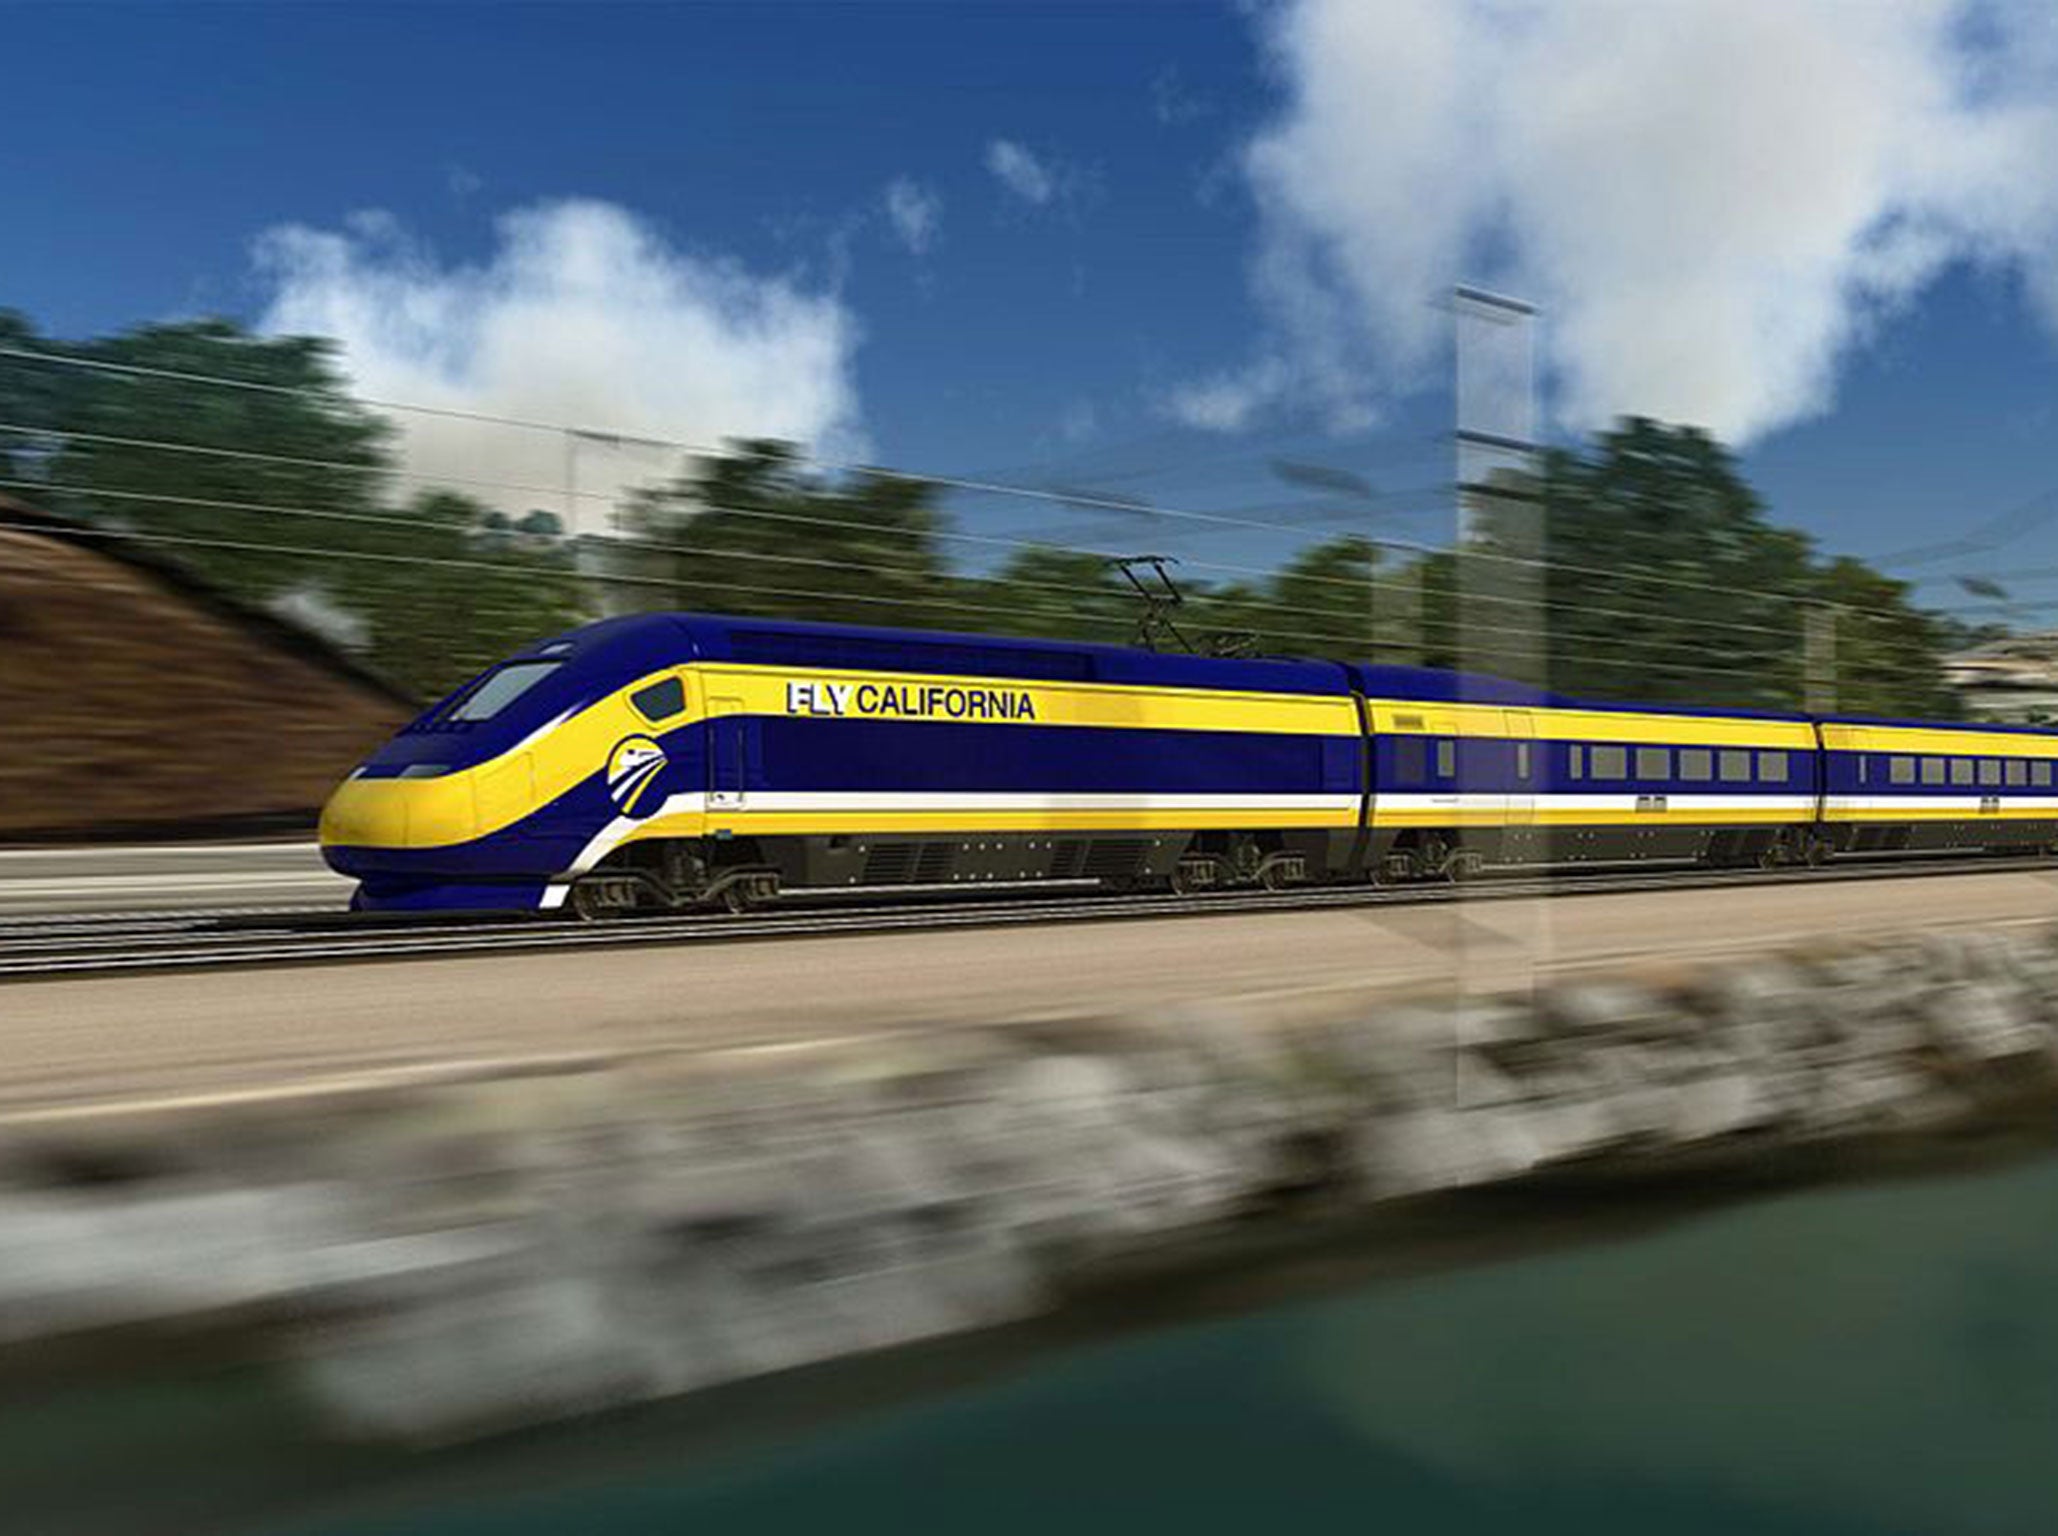 Artists impression of the high-speed LA to San Francisco train